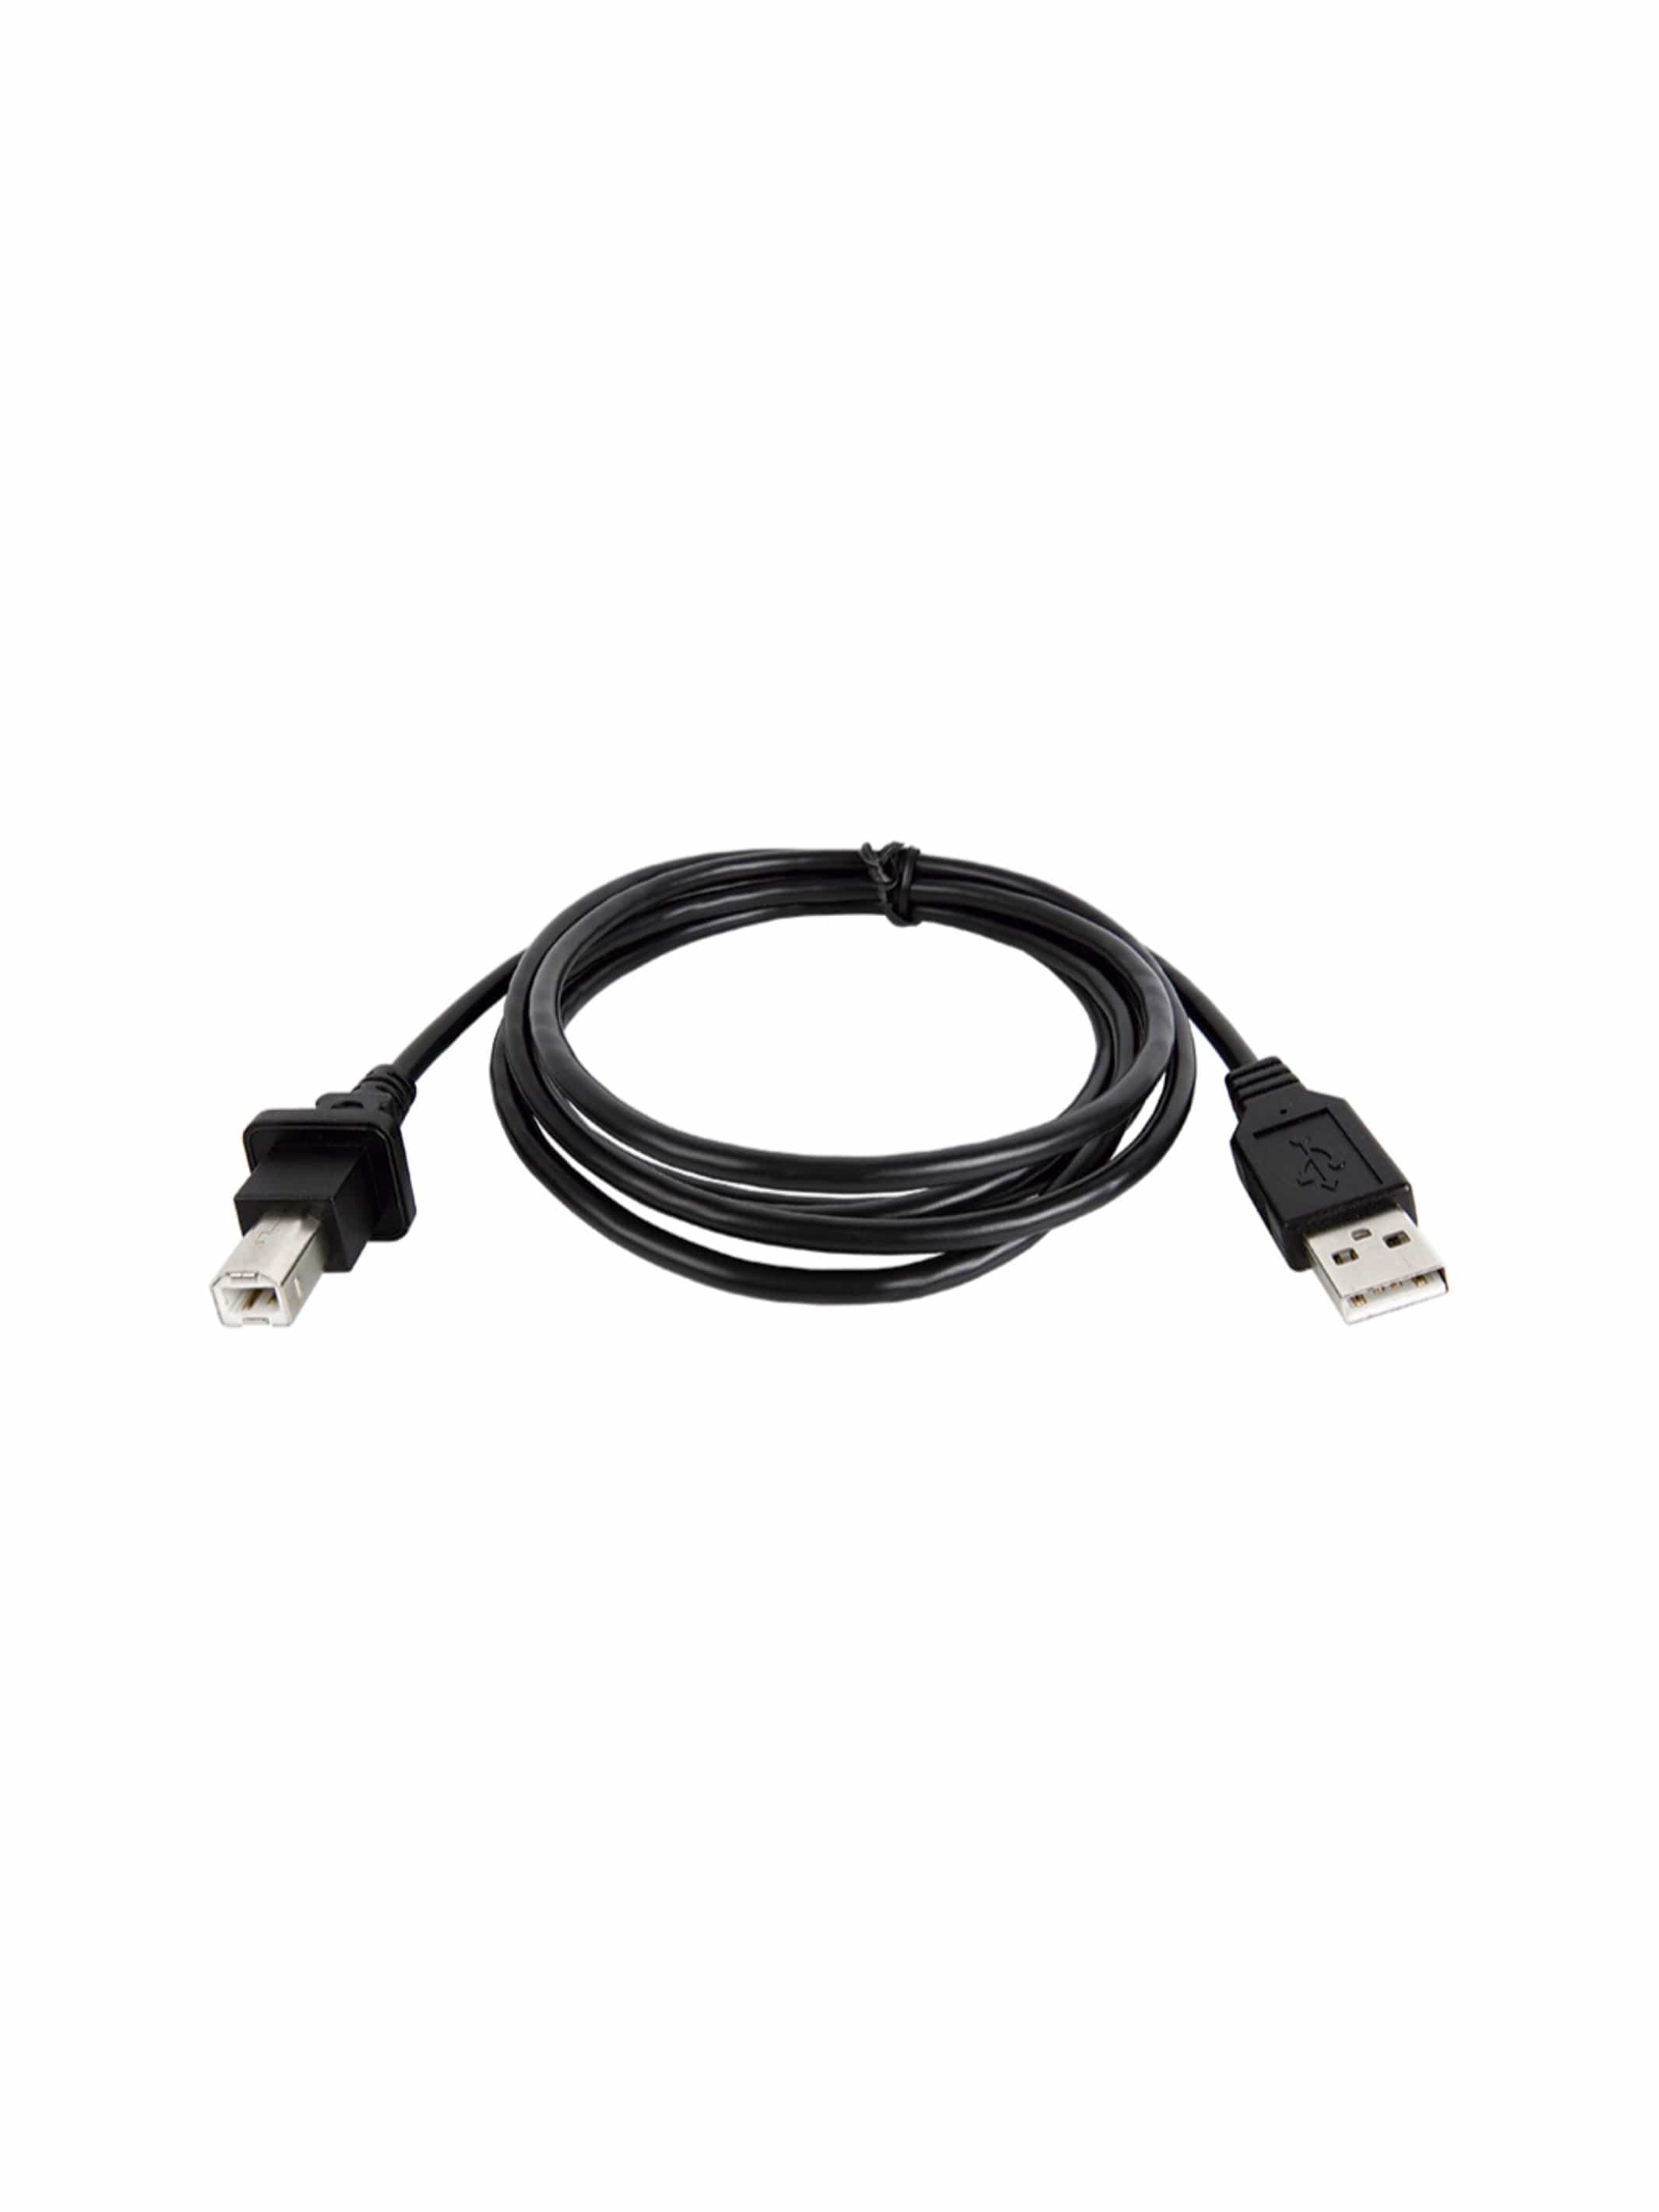 JDC107.9 USB Cable - Jaltest Agricultural, Construction, Heavy Equipment MH & Power Systems Diagnostic Tool Kit